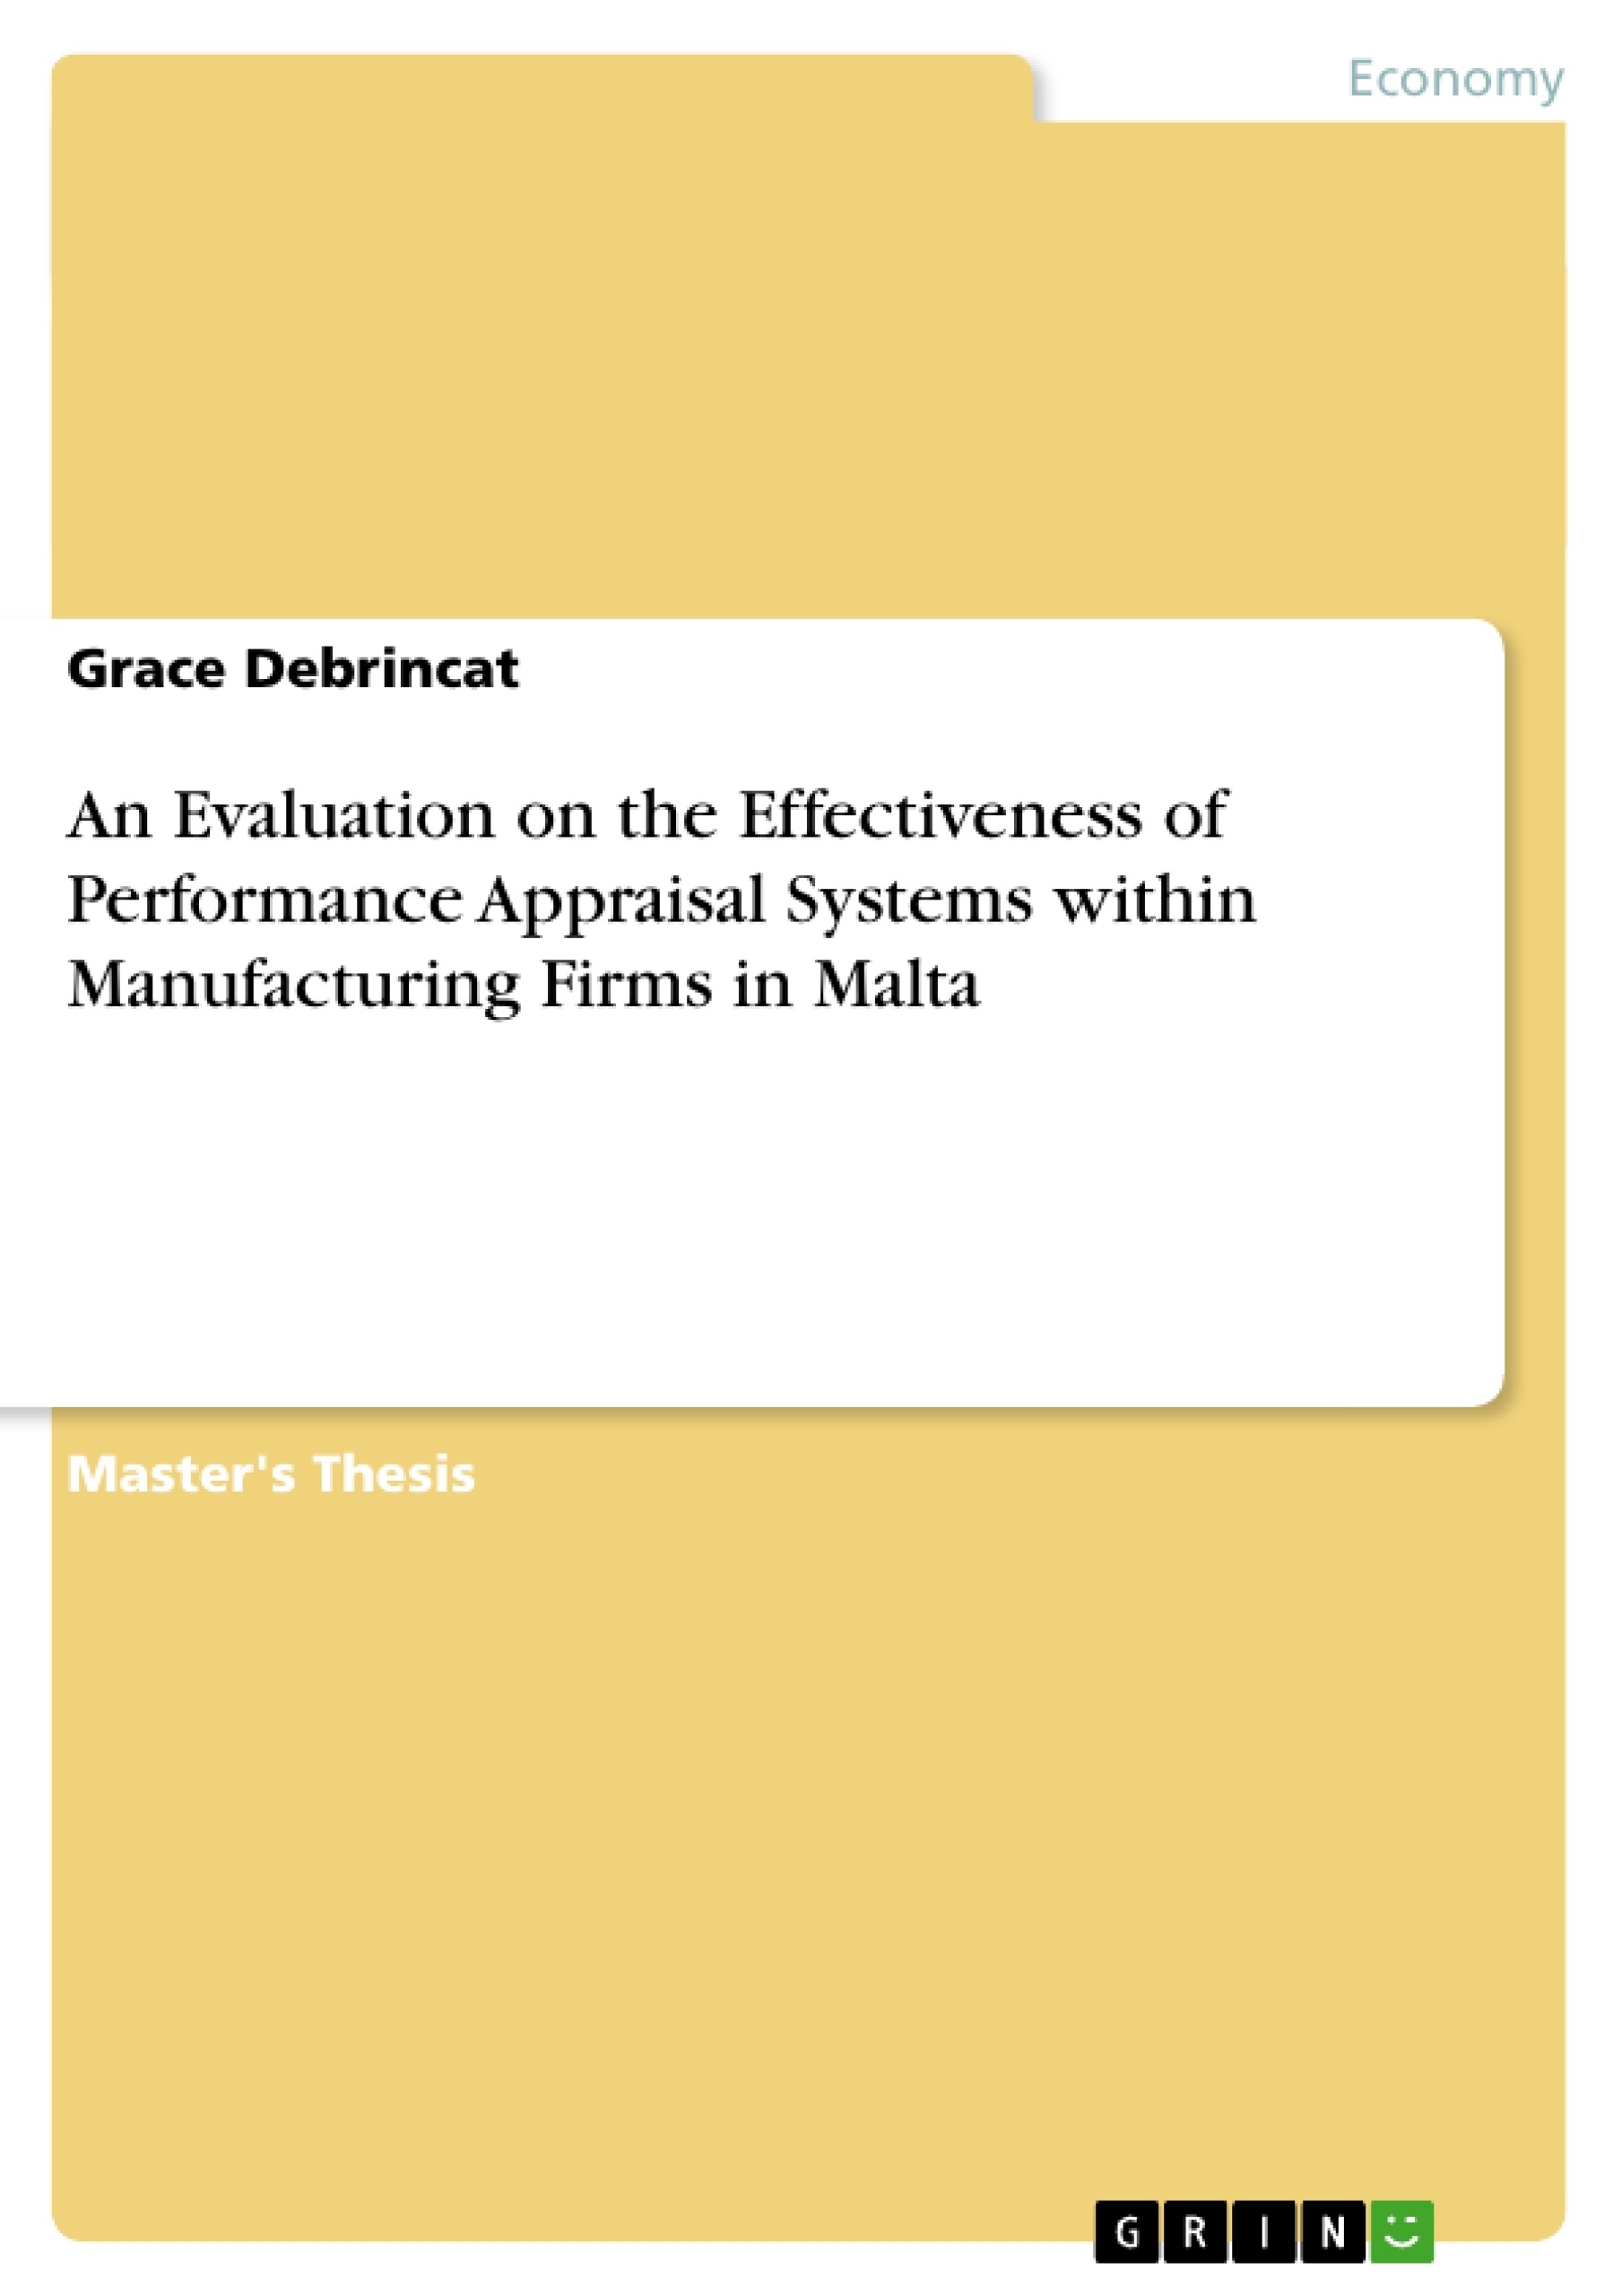 Title: An Evaluation on the Effectiveness of Performance Appraisal Systems within Manufacturing Firms in Malta